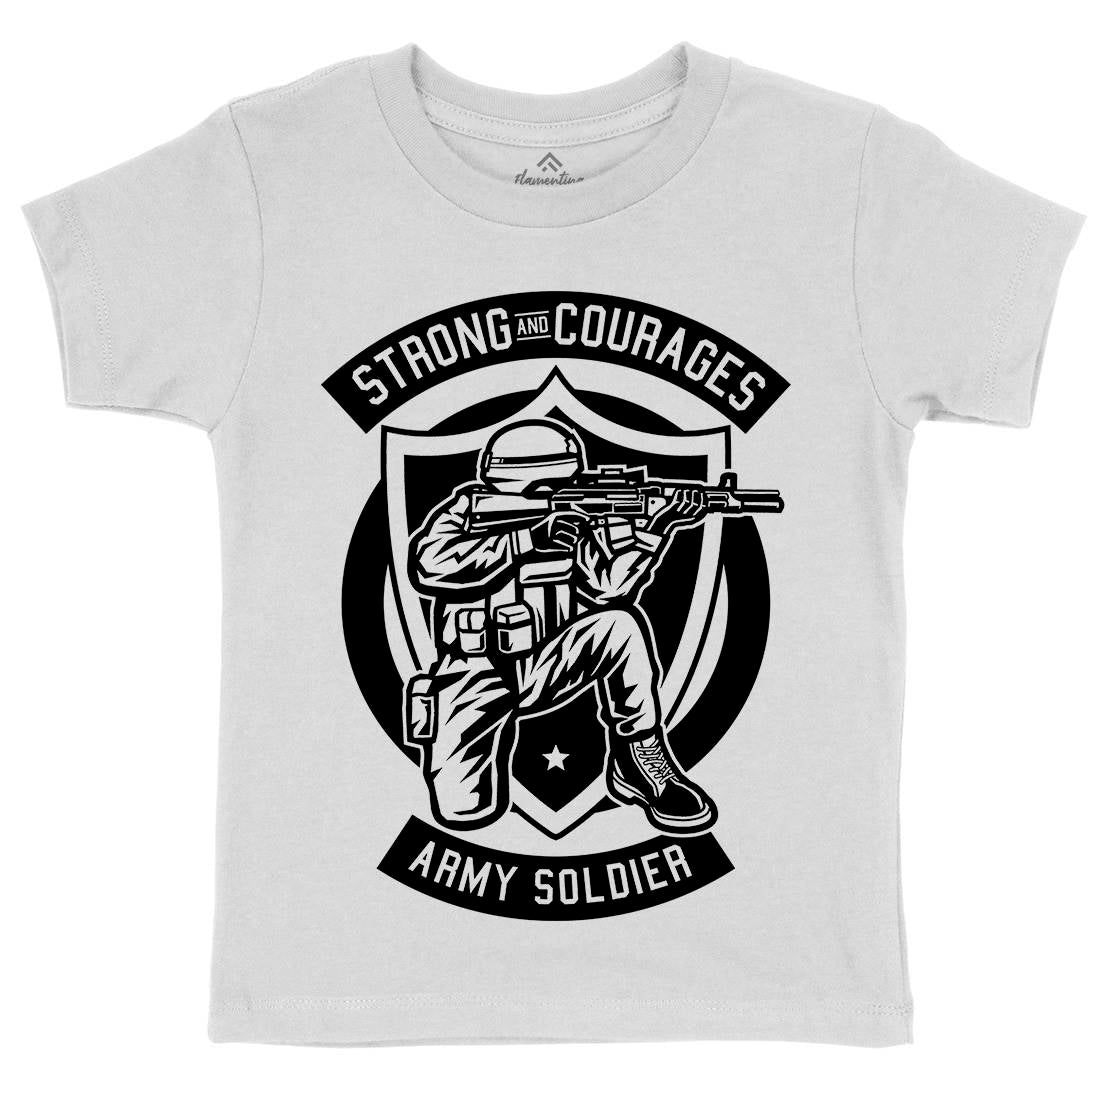 Army Soldier Kids Crew Neck T-Shirt Army B483